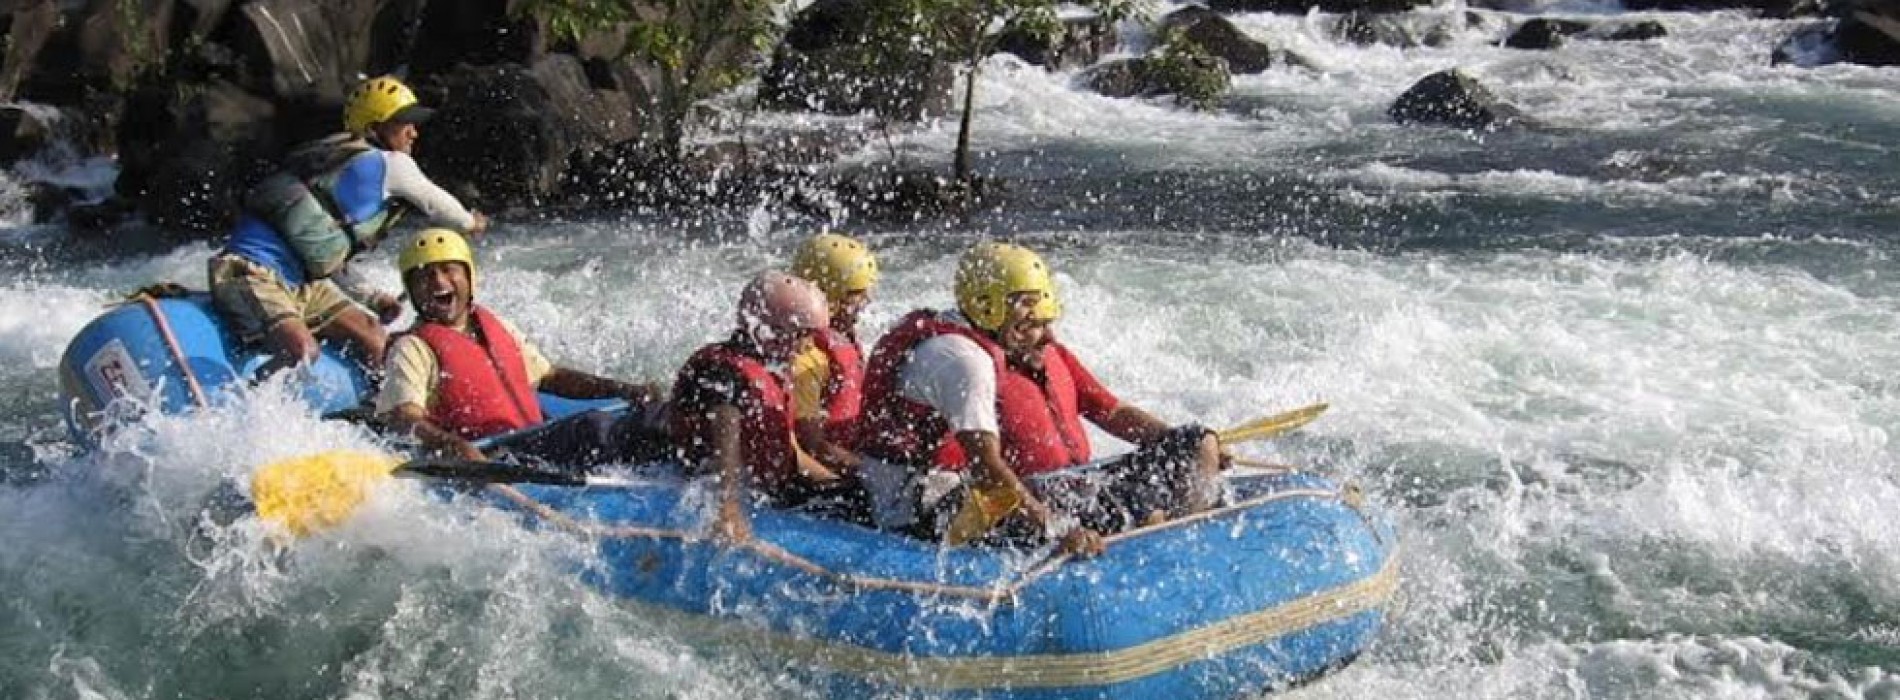 White Water Rafting commences in Goa!